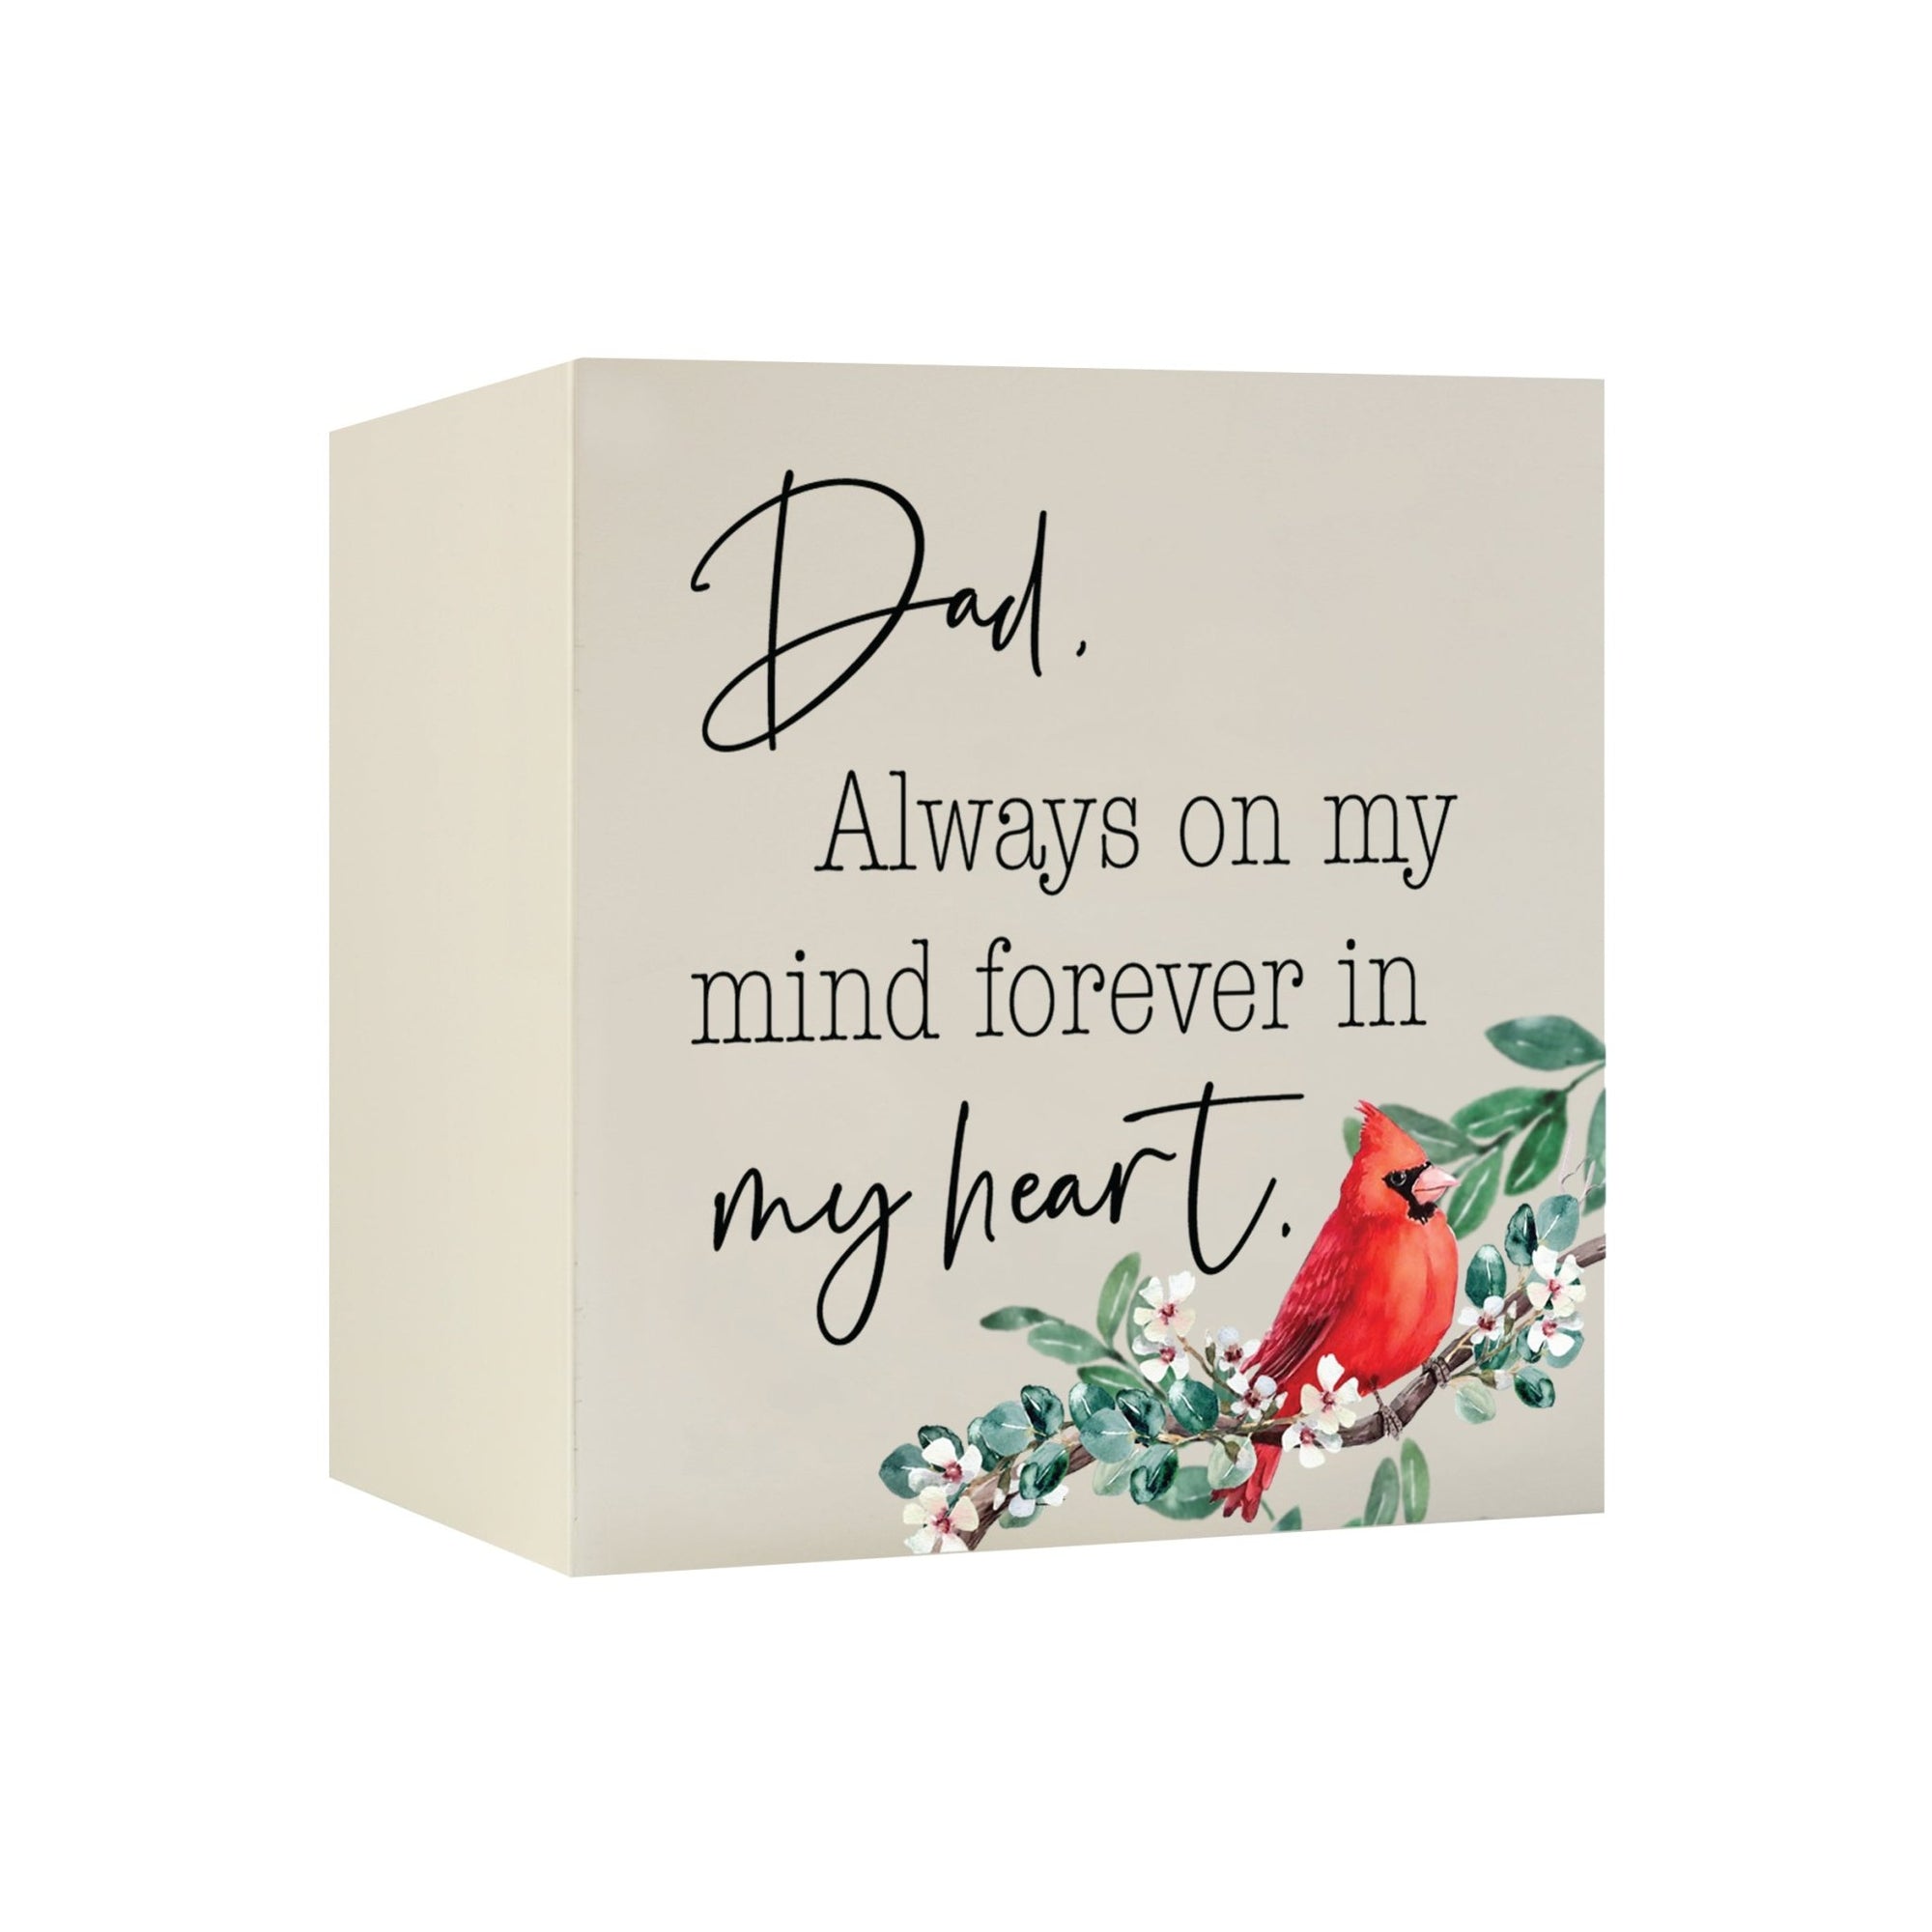 Lifesong Milestones Memorial Wooden Cremation Urn Box for Human Ashes - A beautiful and meaningful resting place- Dad Urn